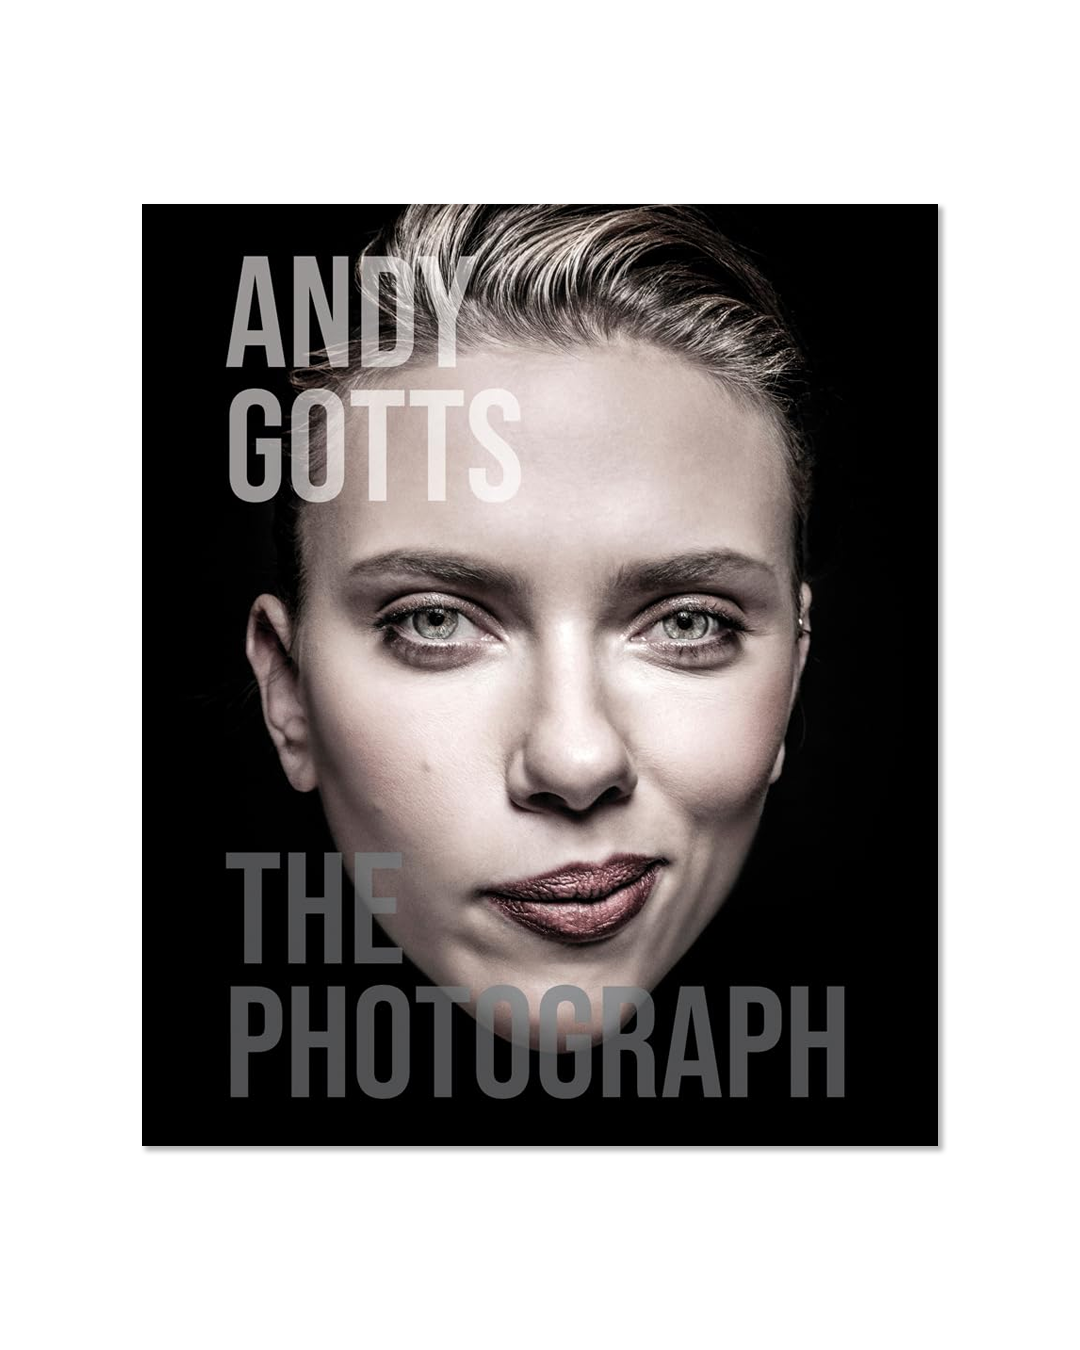 Andy Gotts: The photography